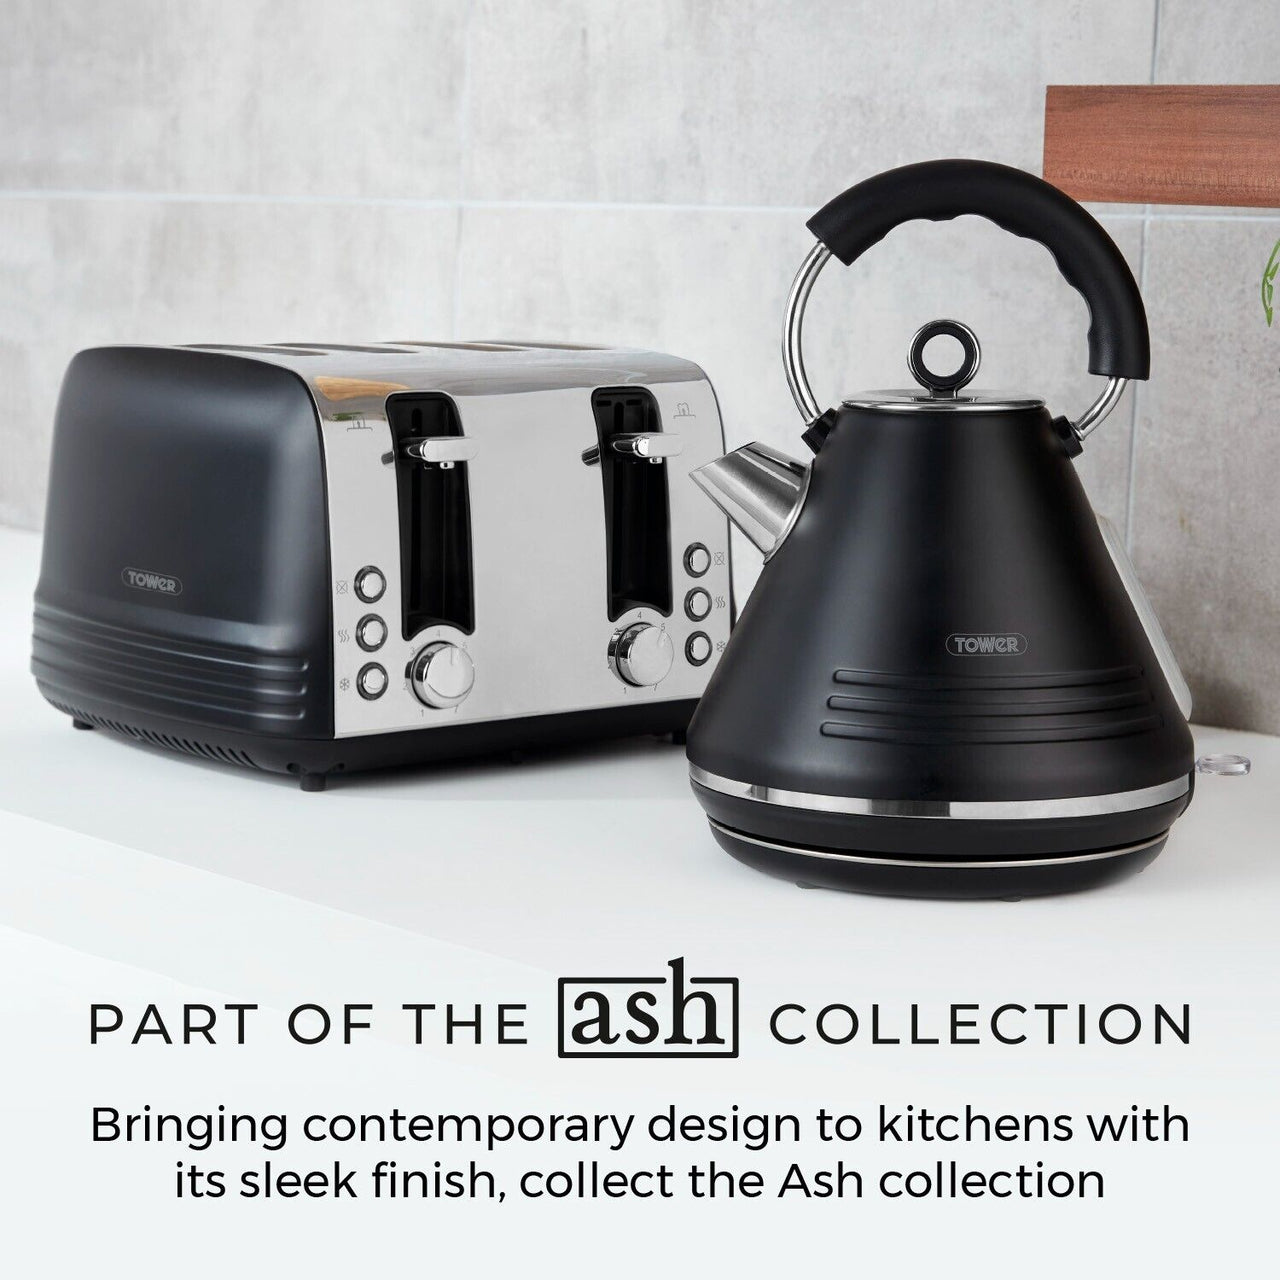 Tower Ash Black Pyramid Kettle, 4 Slice Toaster & T24041BLK 800W 20L Microwave